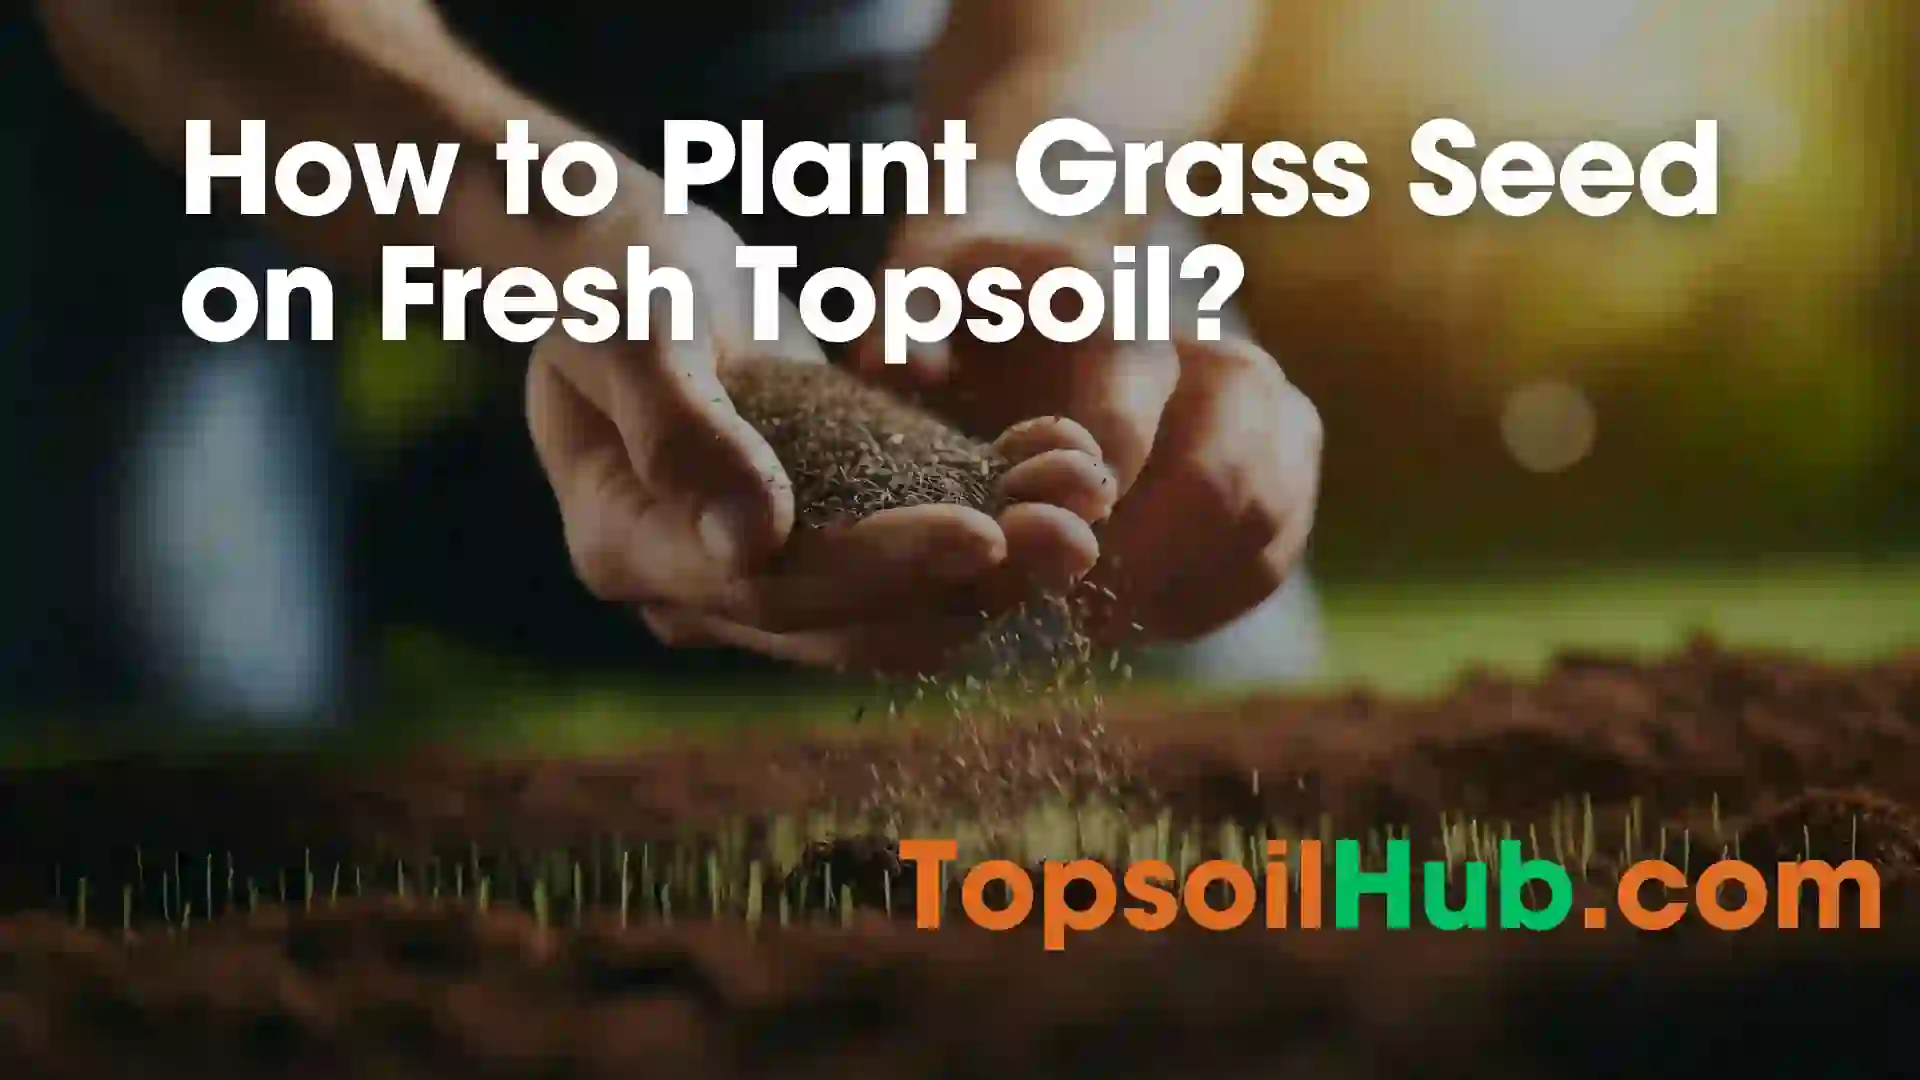 How to Plant Grass Seed on Fresh Topsoil